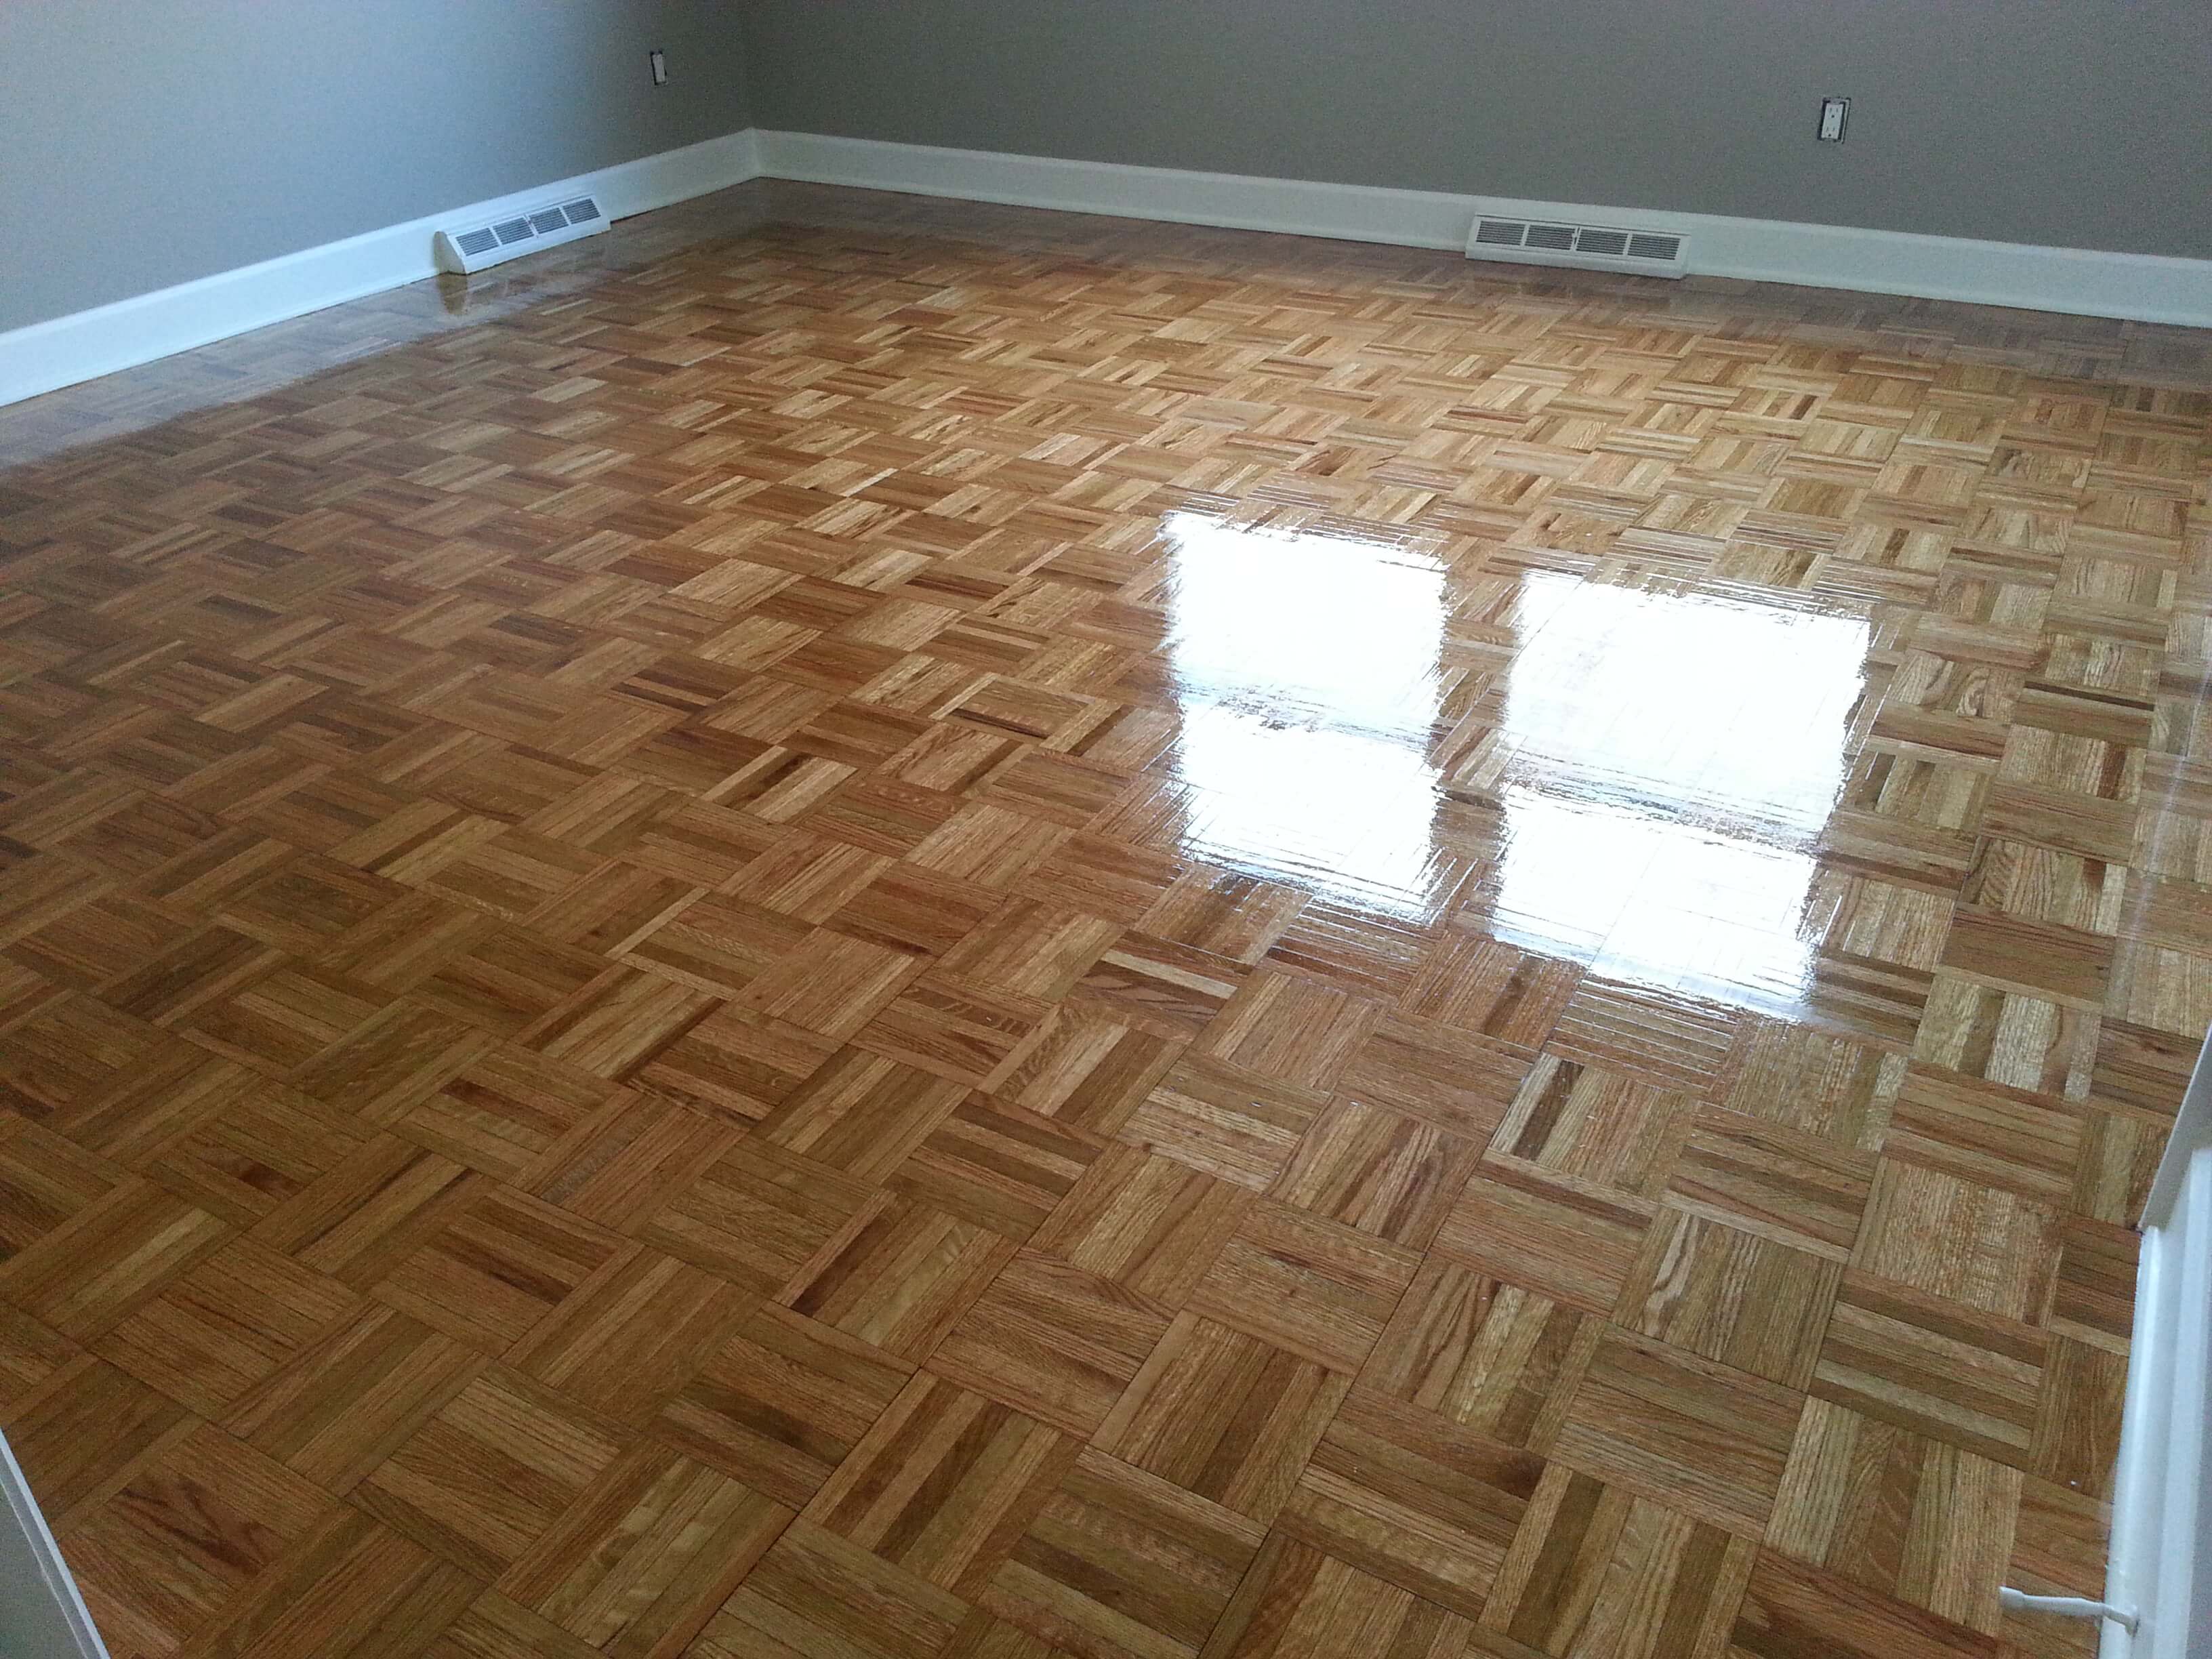 A recently refinished parquet wood floor